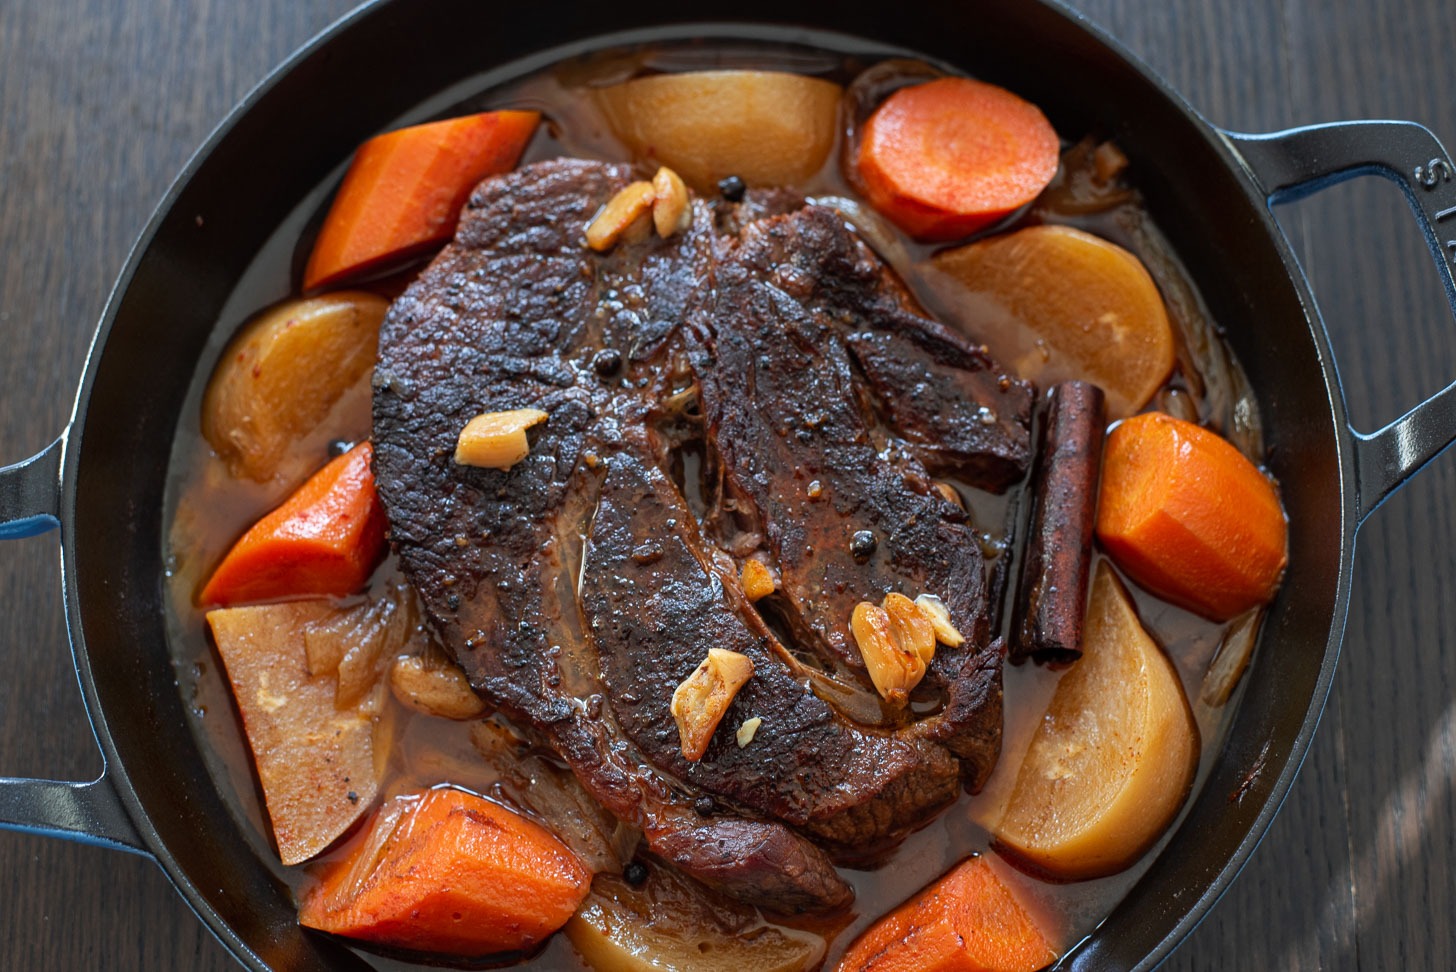 Spiced beef pot roast with onion, carrot, turnip is presented in a braising pan.